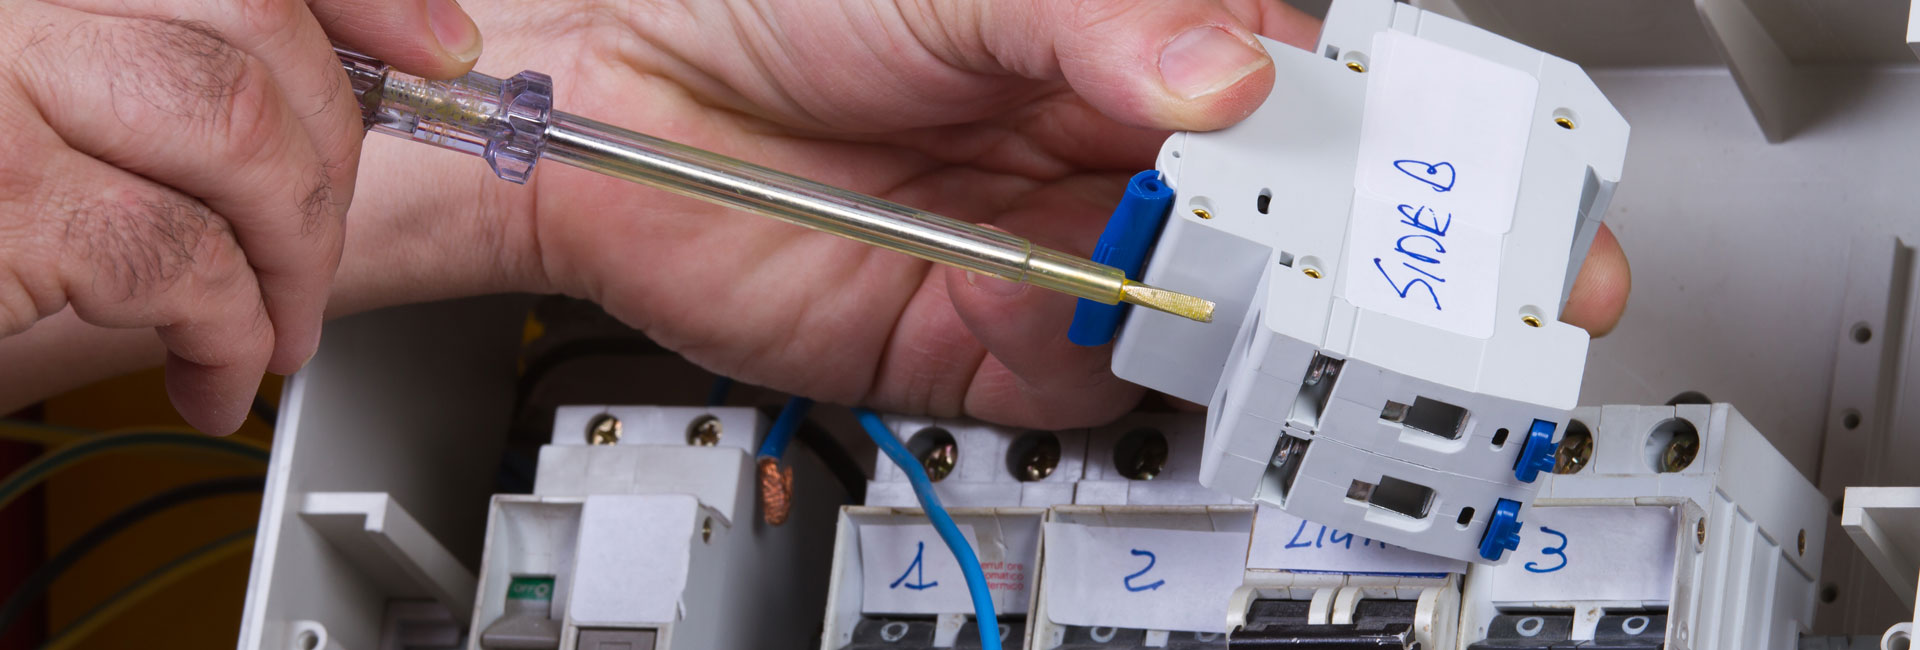 Electrician Fixing Electrical Devices